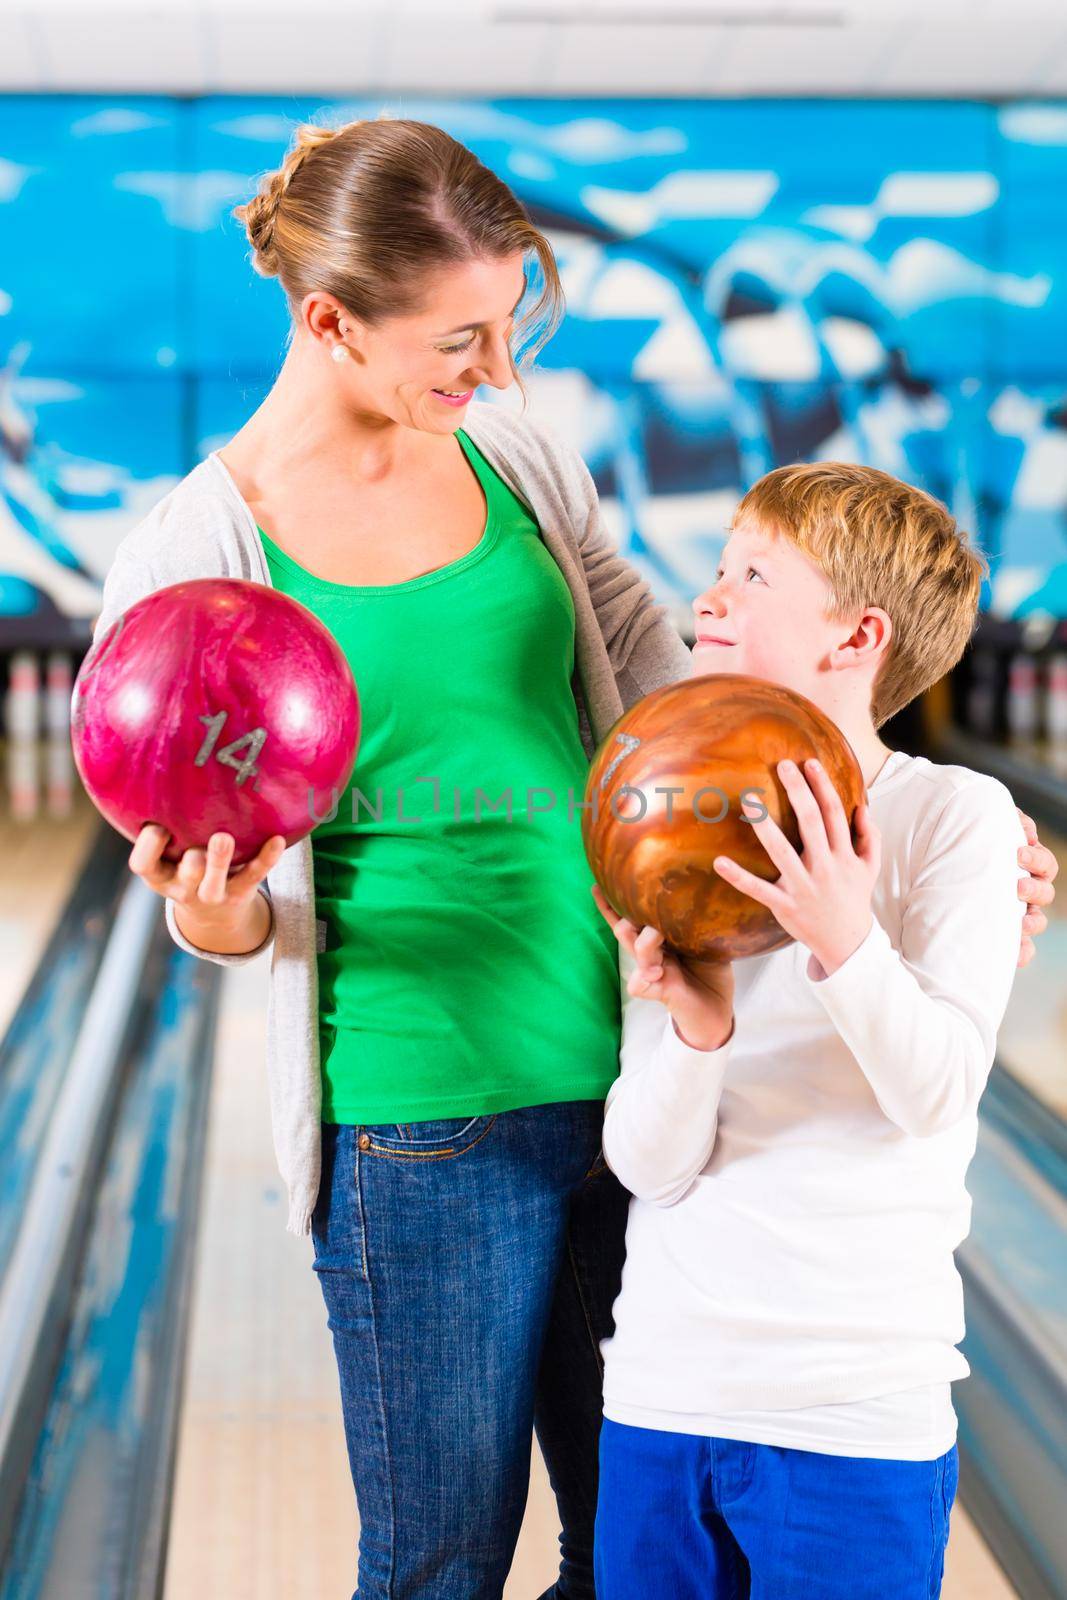 Mother and son playing together at bowling center by Kzenon